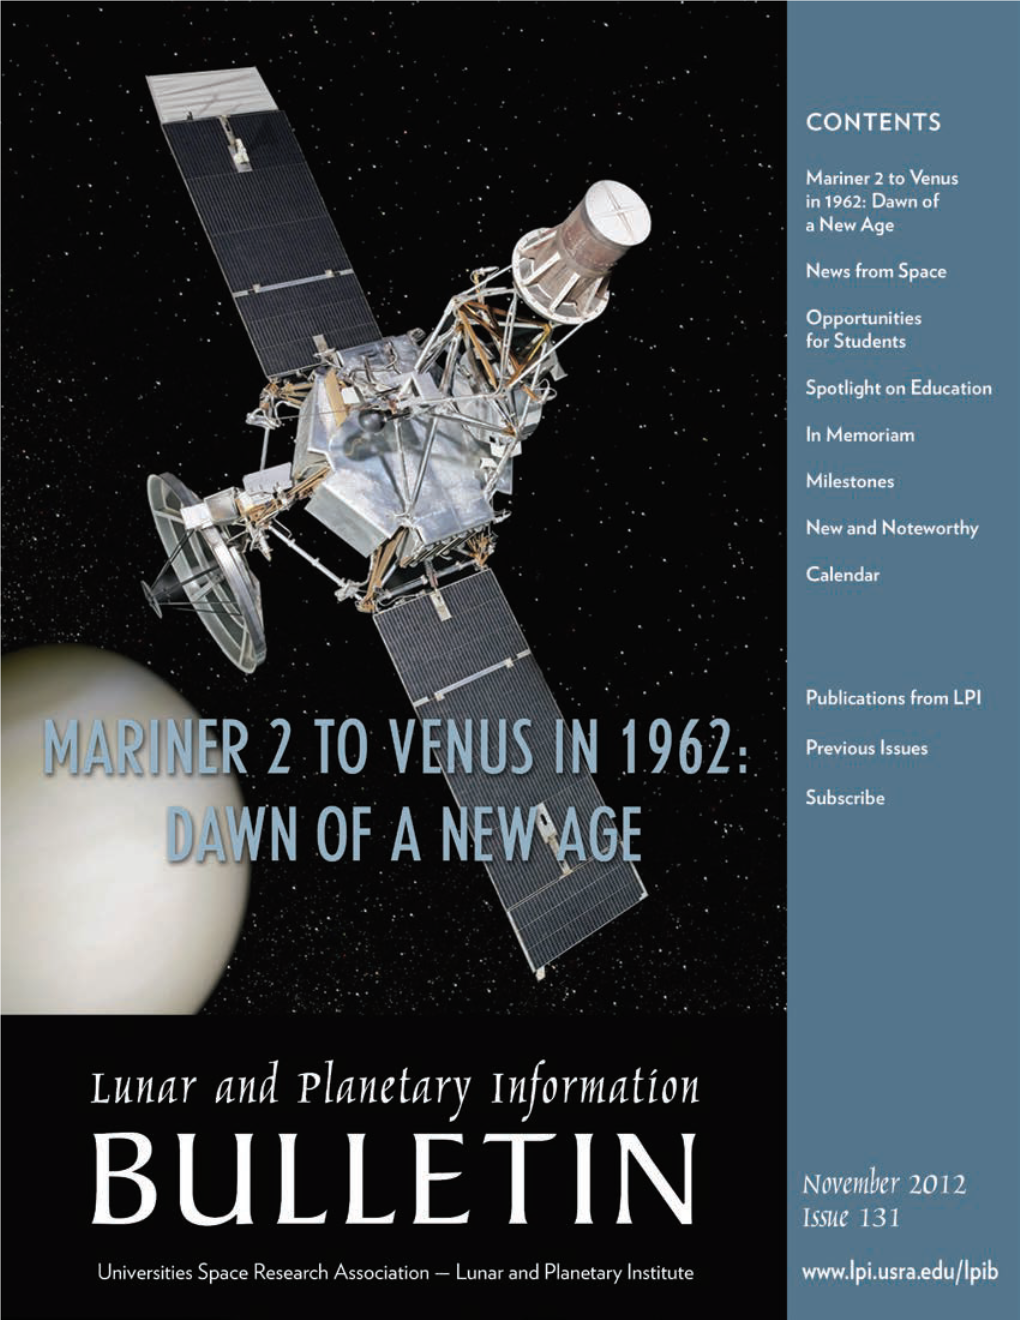 Mariner 2 to Venus in 1962: Dawn of a New Age